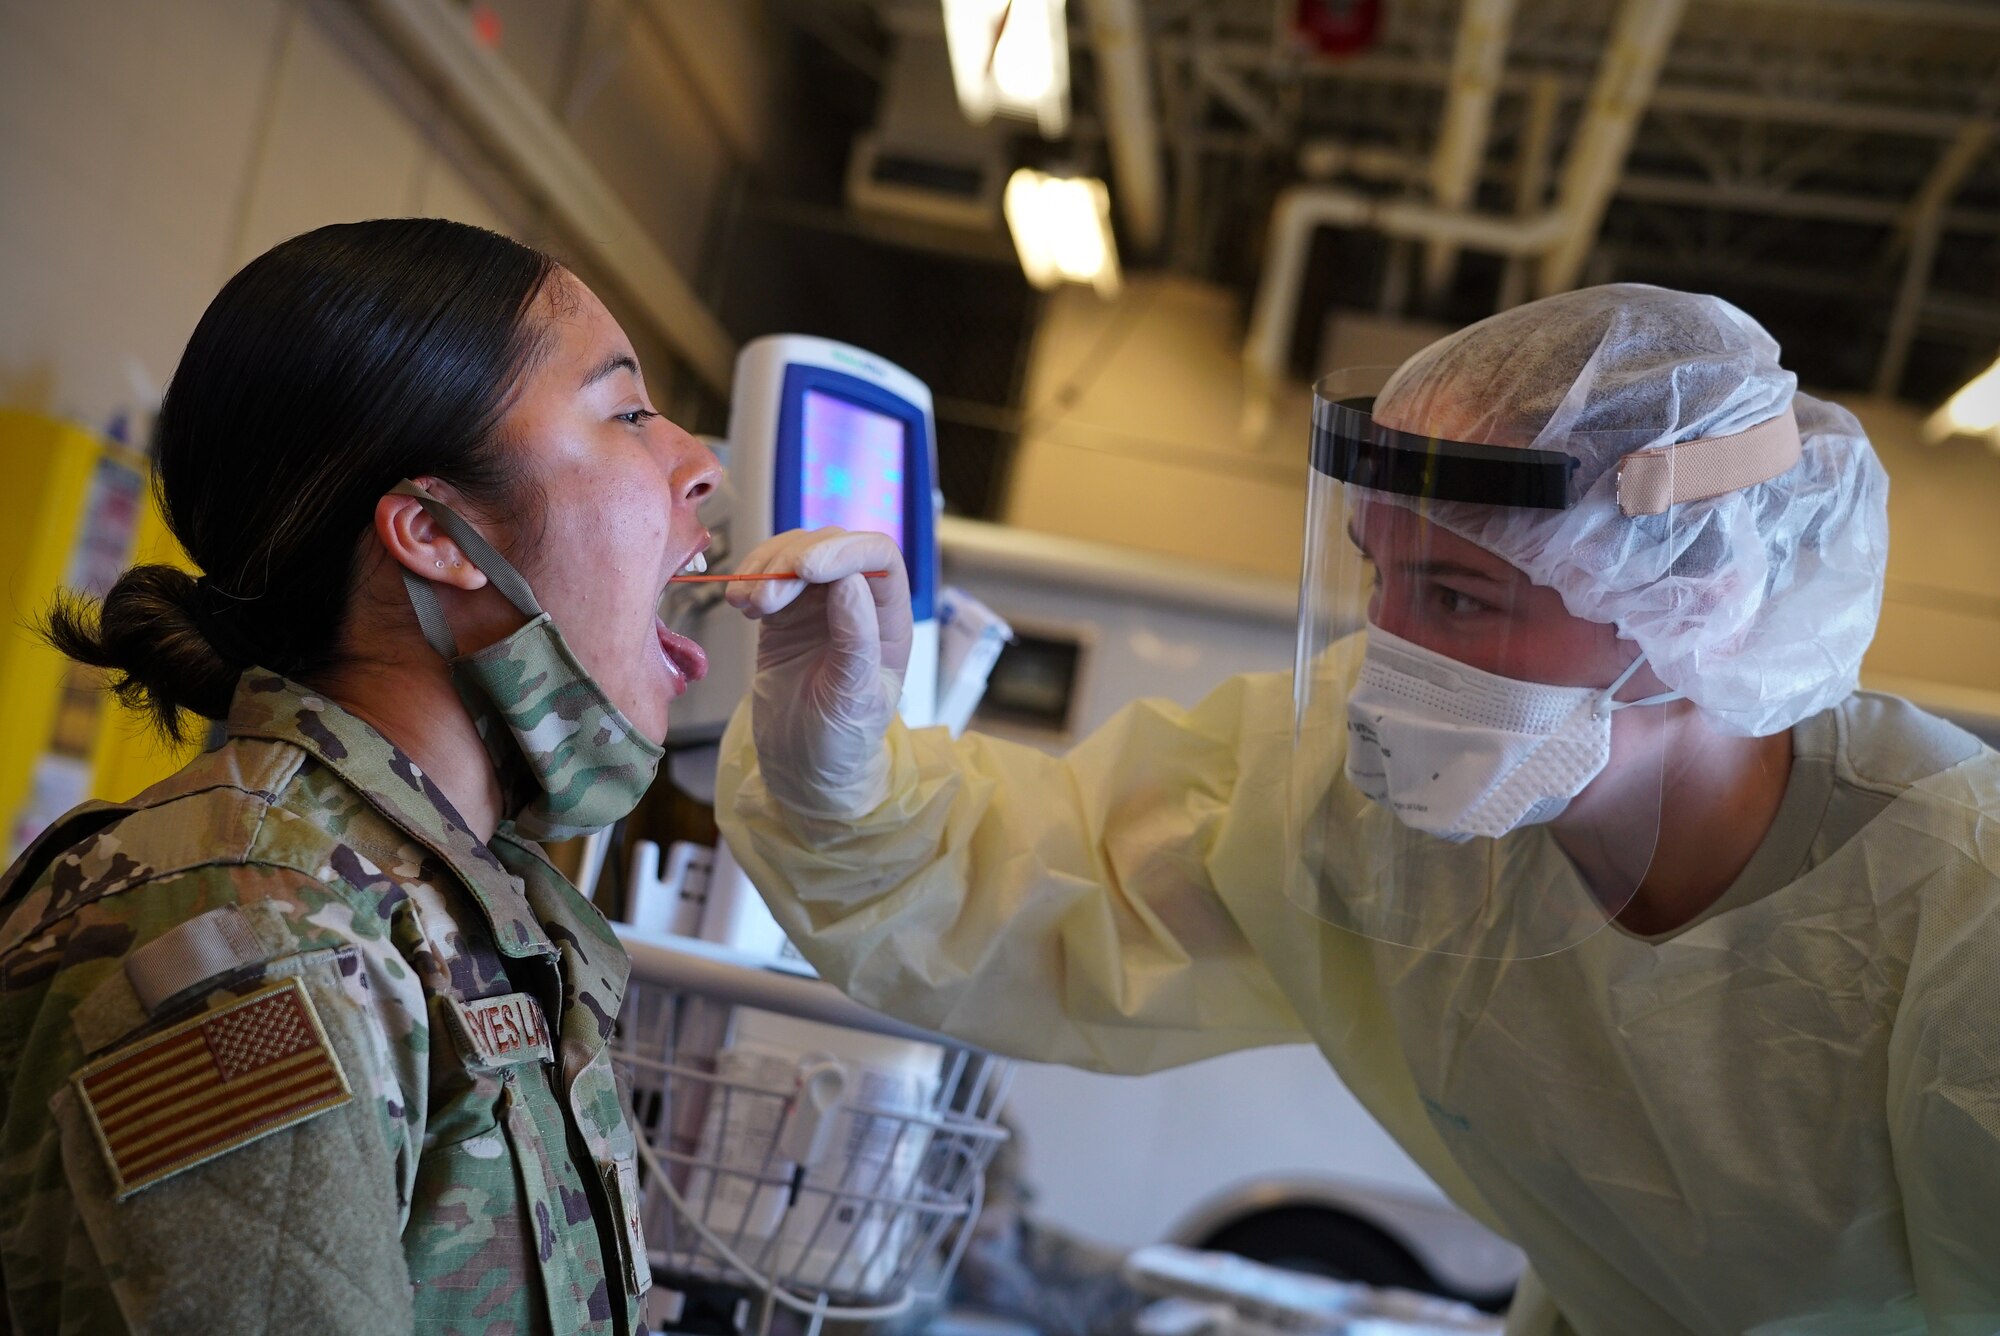 A woman in military uniform opens her mouth and sticks out her tongue as a medical technician wearing gloves, a face mask and protective gown swabs the back of her throat.